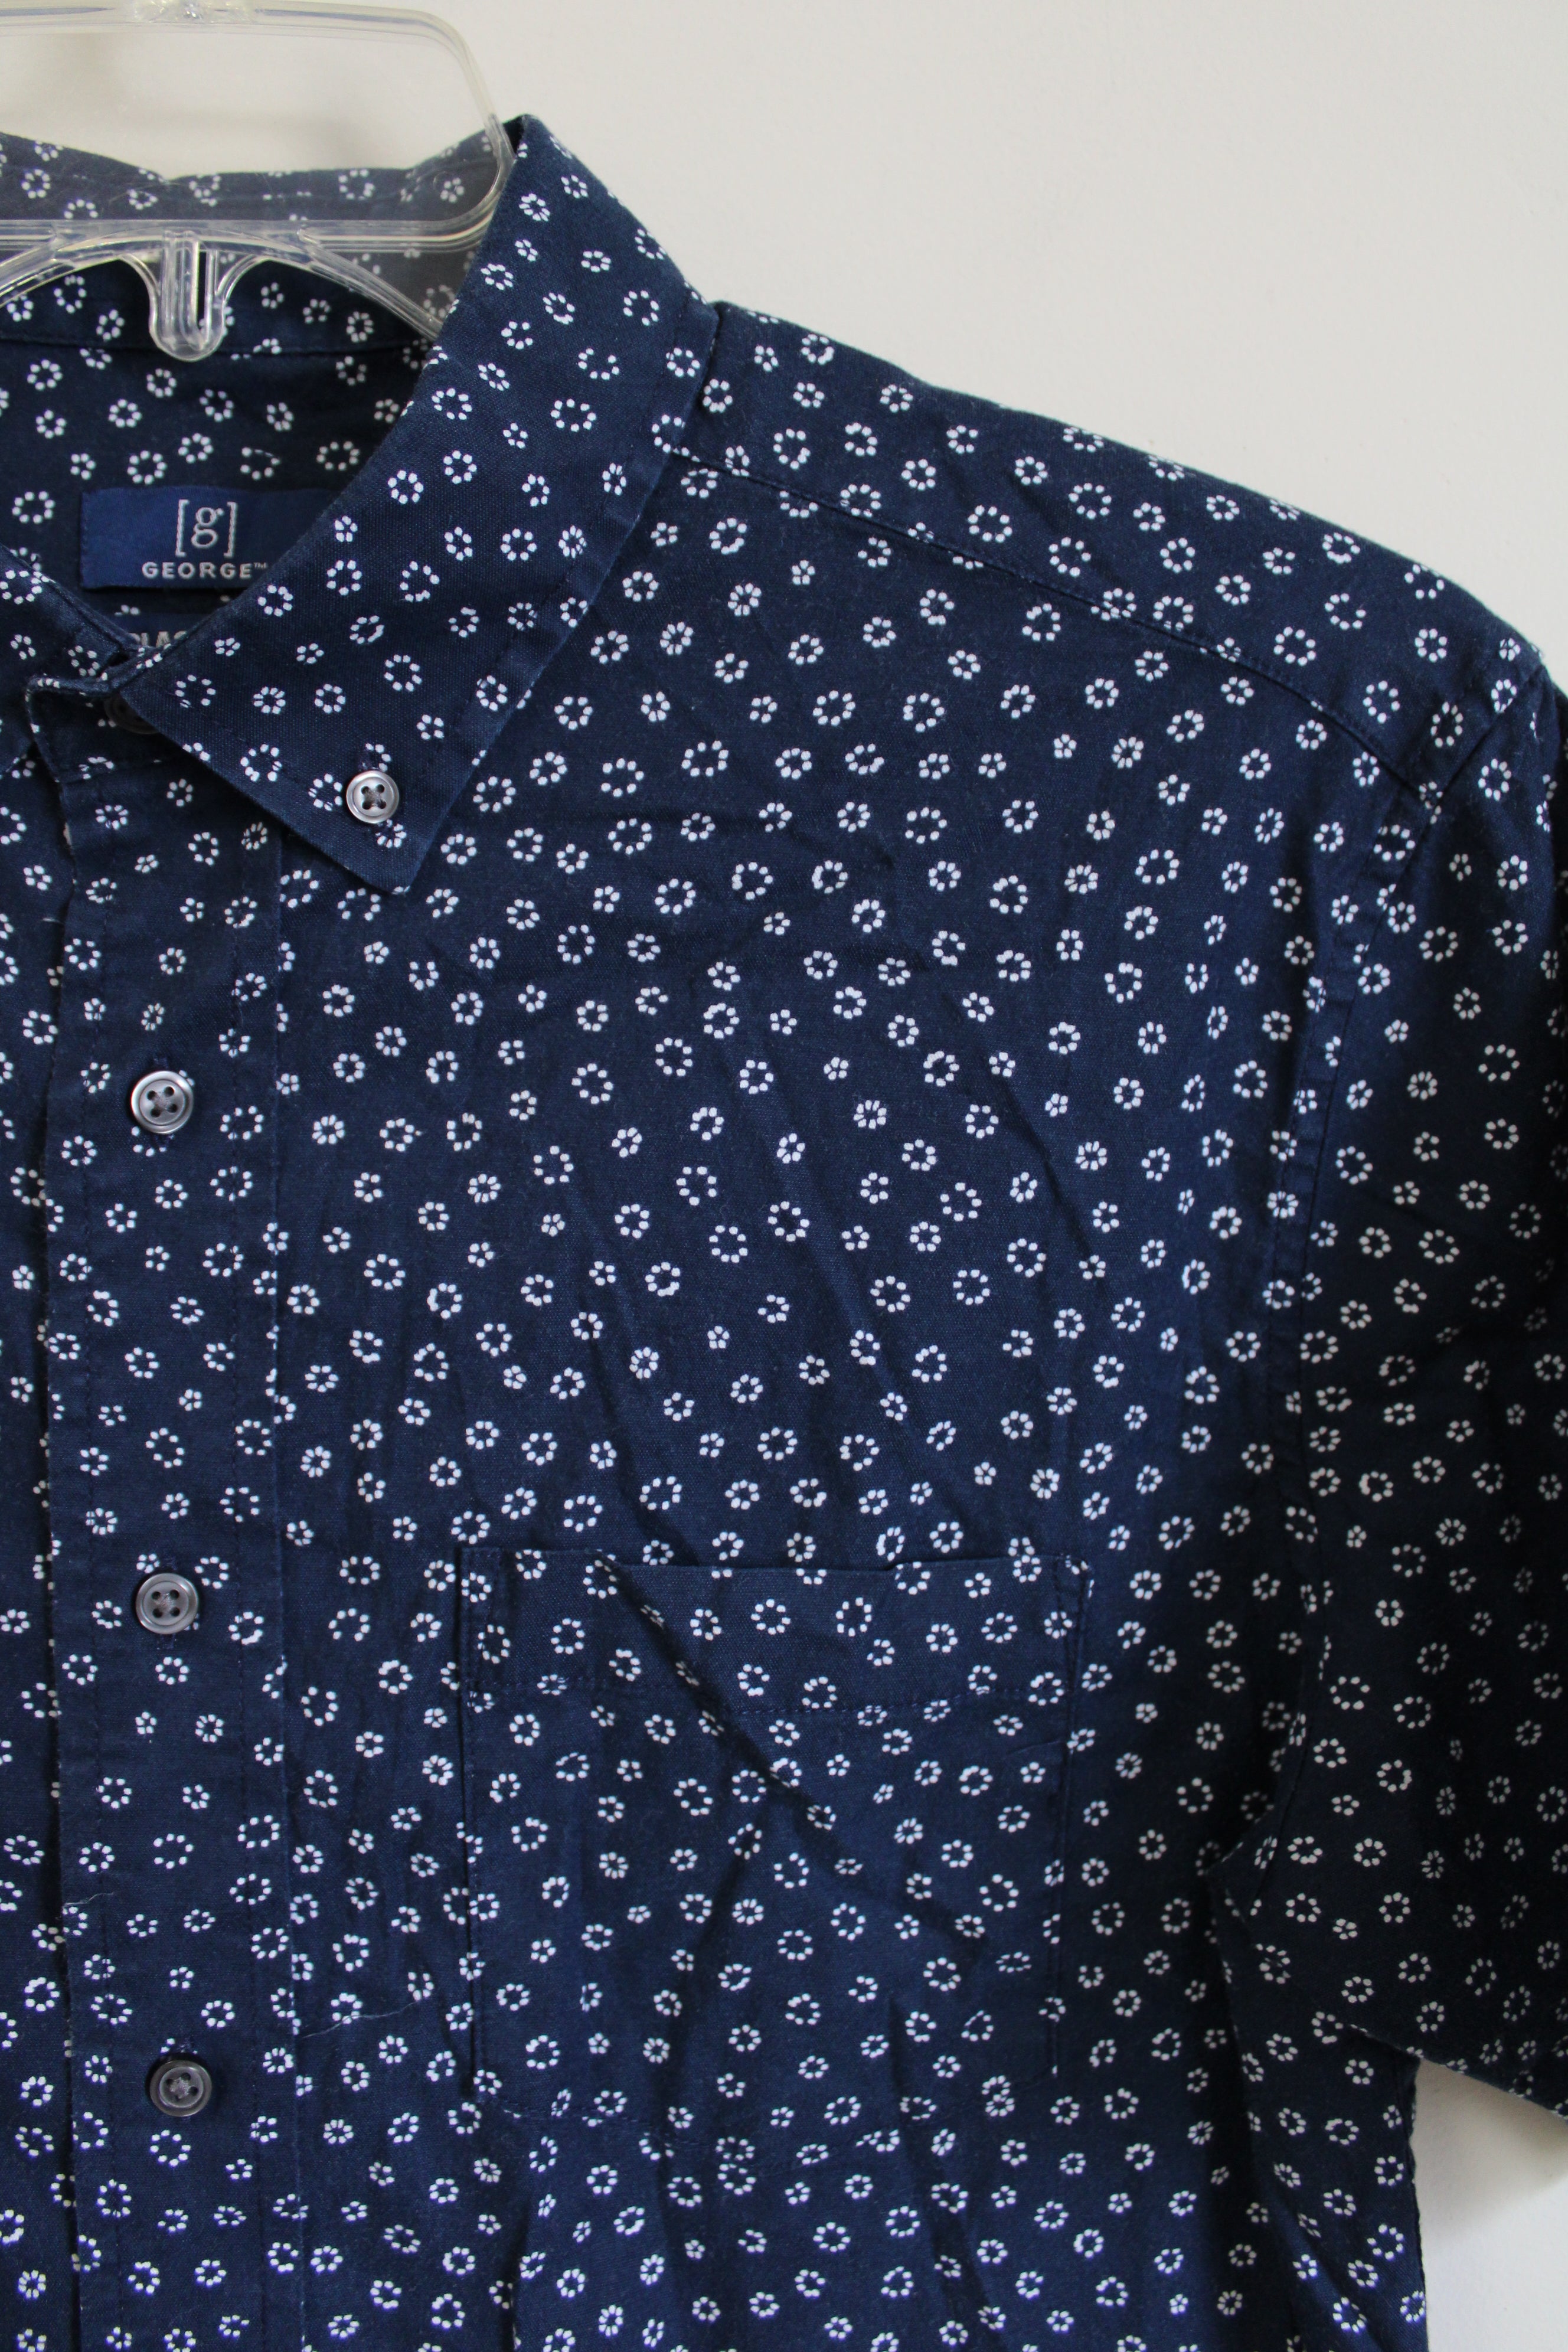 George Classic Fit Navy Blue Patterned Button Down Shirt | M